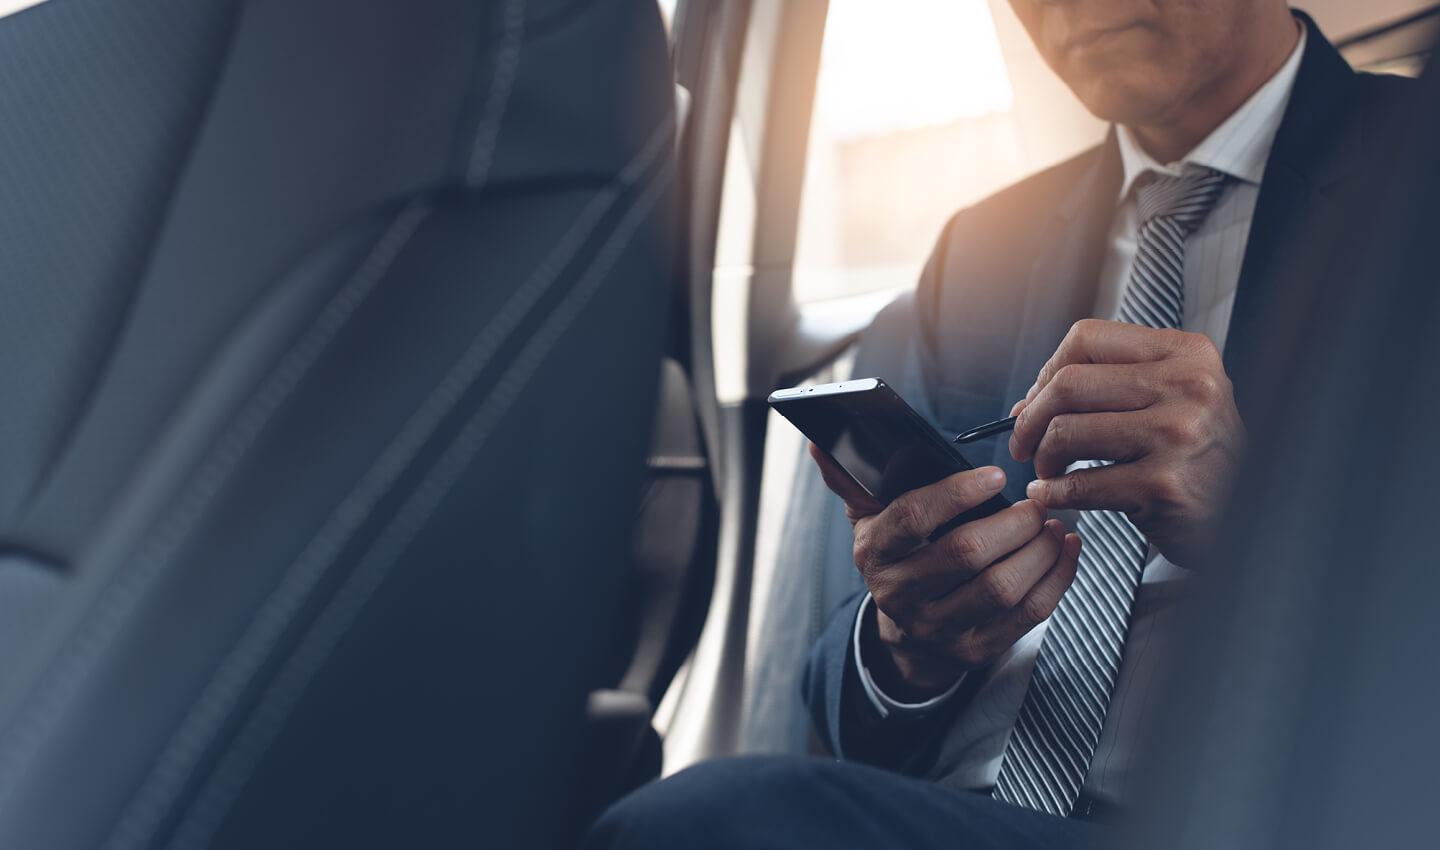 A businessman in a suit checking his mobile device